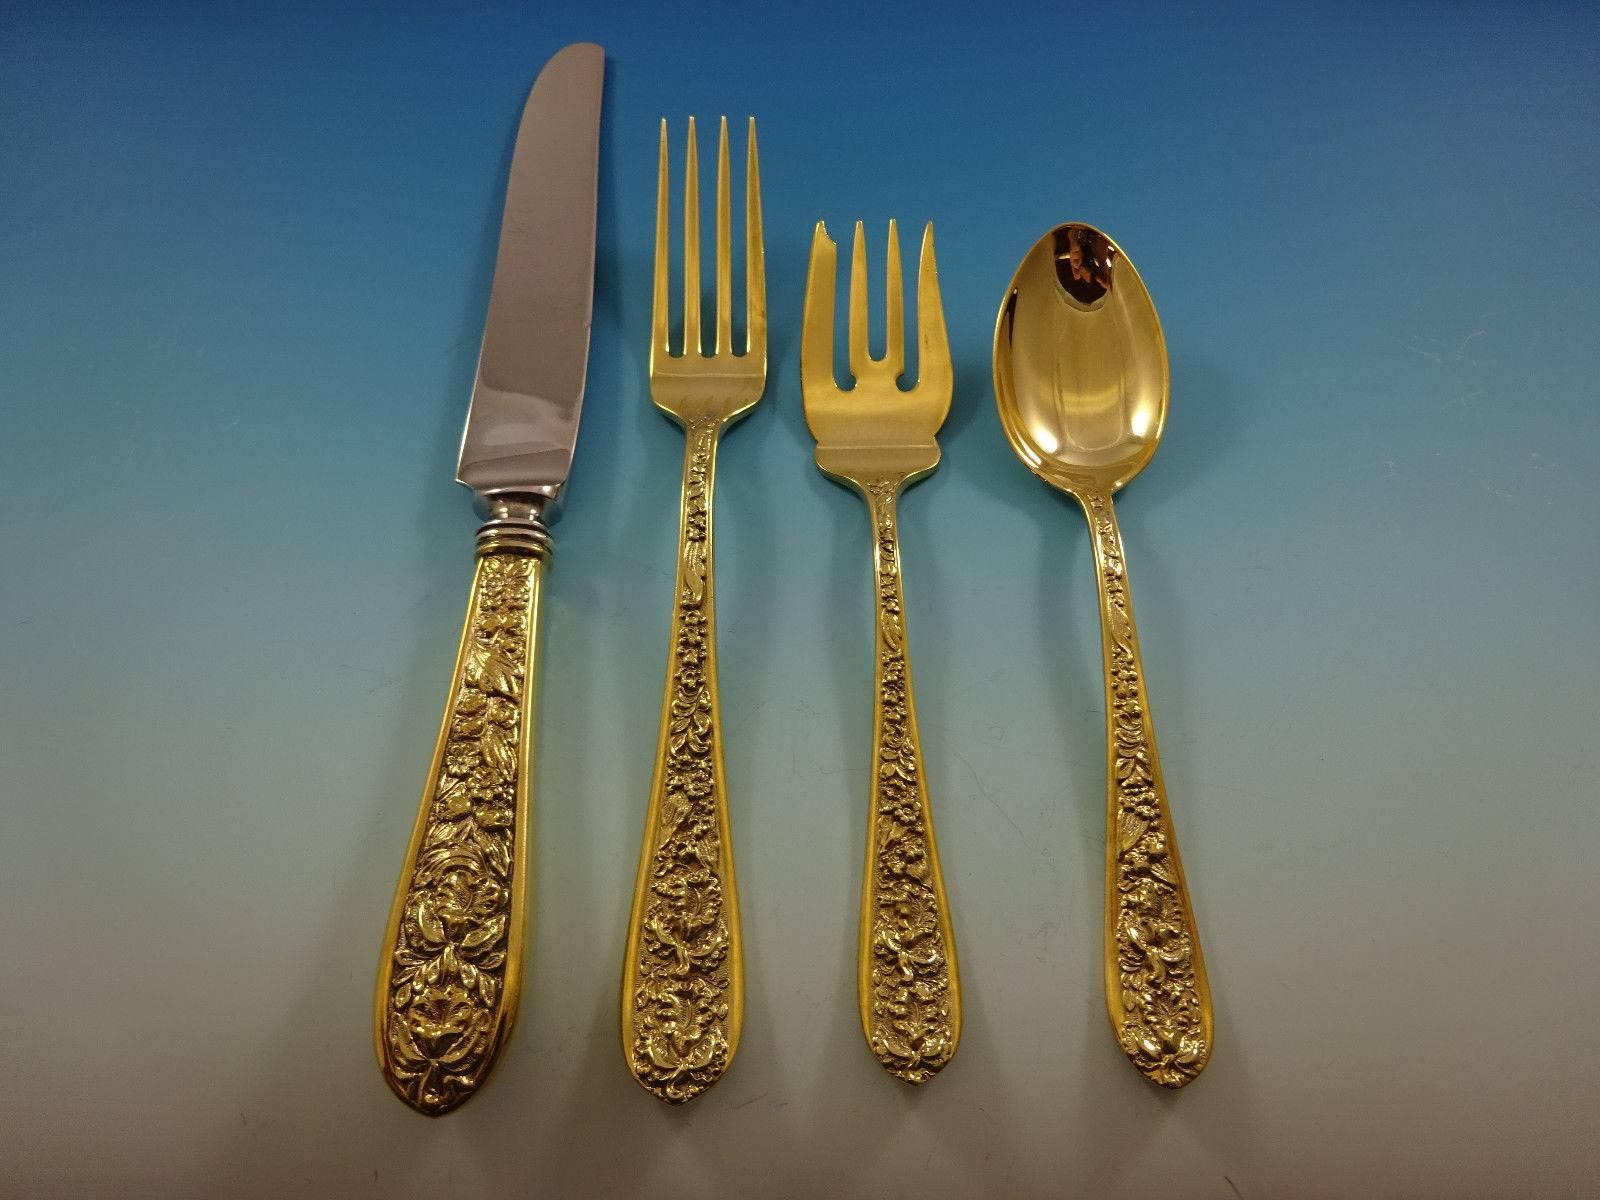 Corsage gold by Stieff sterling silver flatware set of 48 pieces. Gold flatware is on trend and makes a bold statement on your table. This set is vermeil (completely gold-washed over sterling silver) and includes:

12 Knives, 9